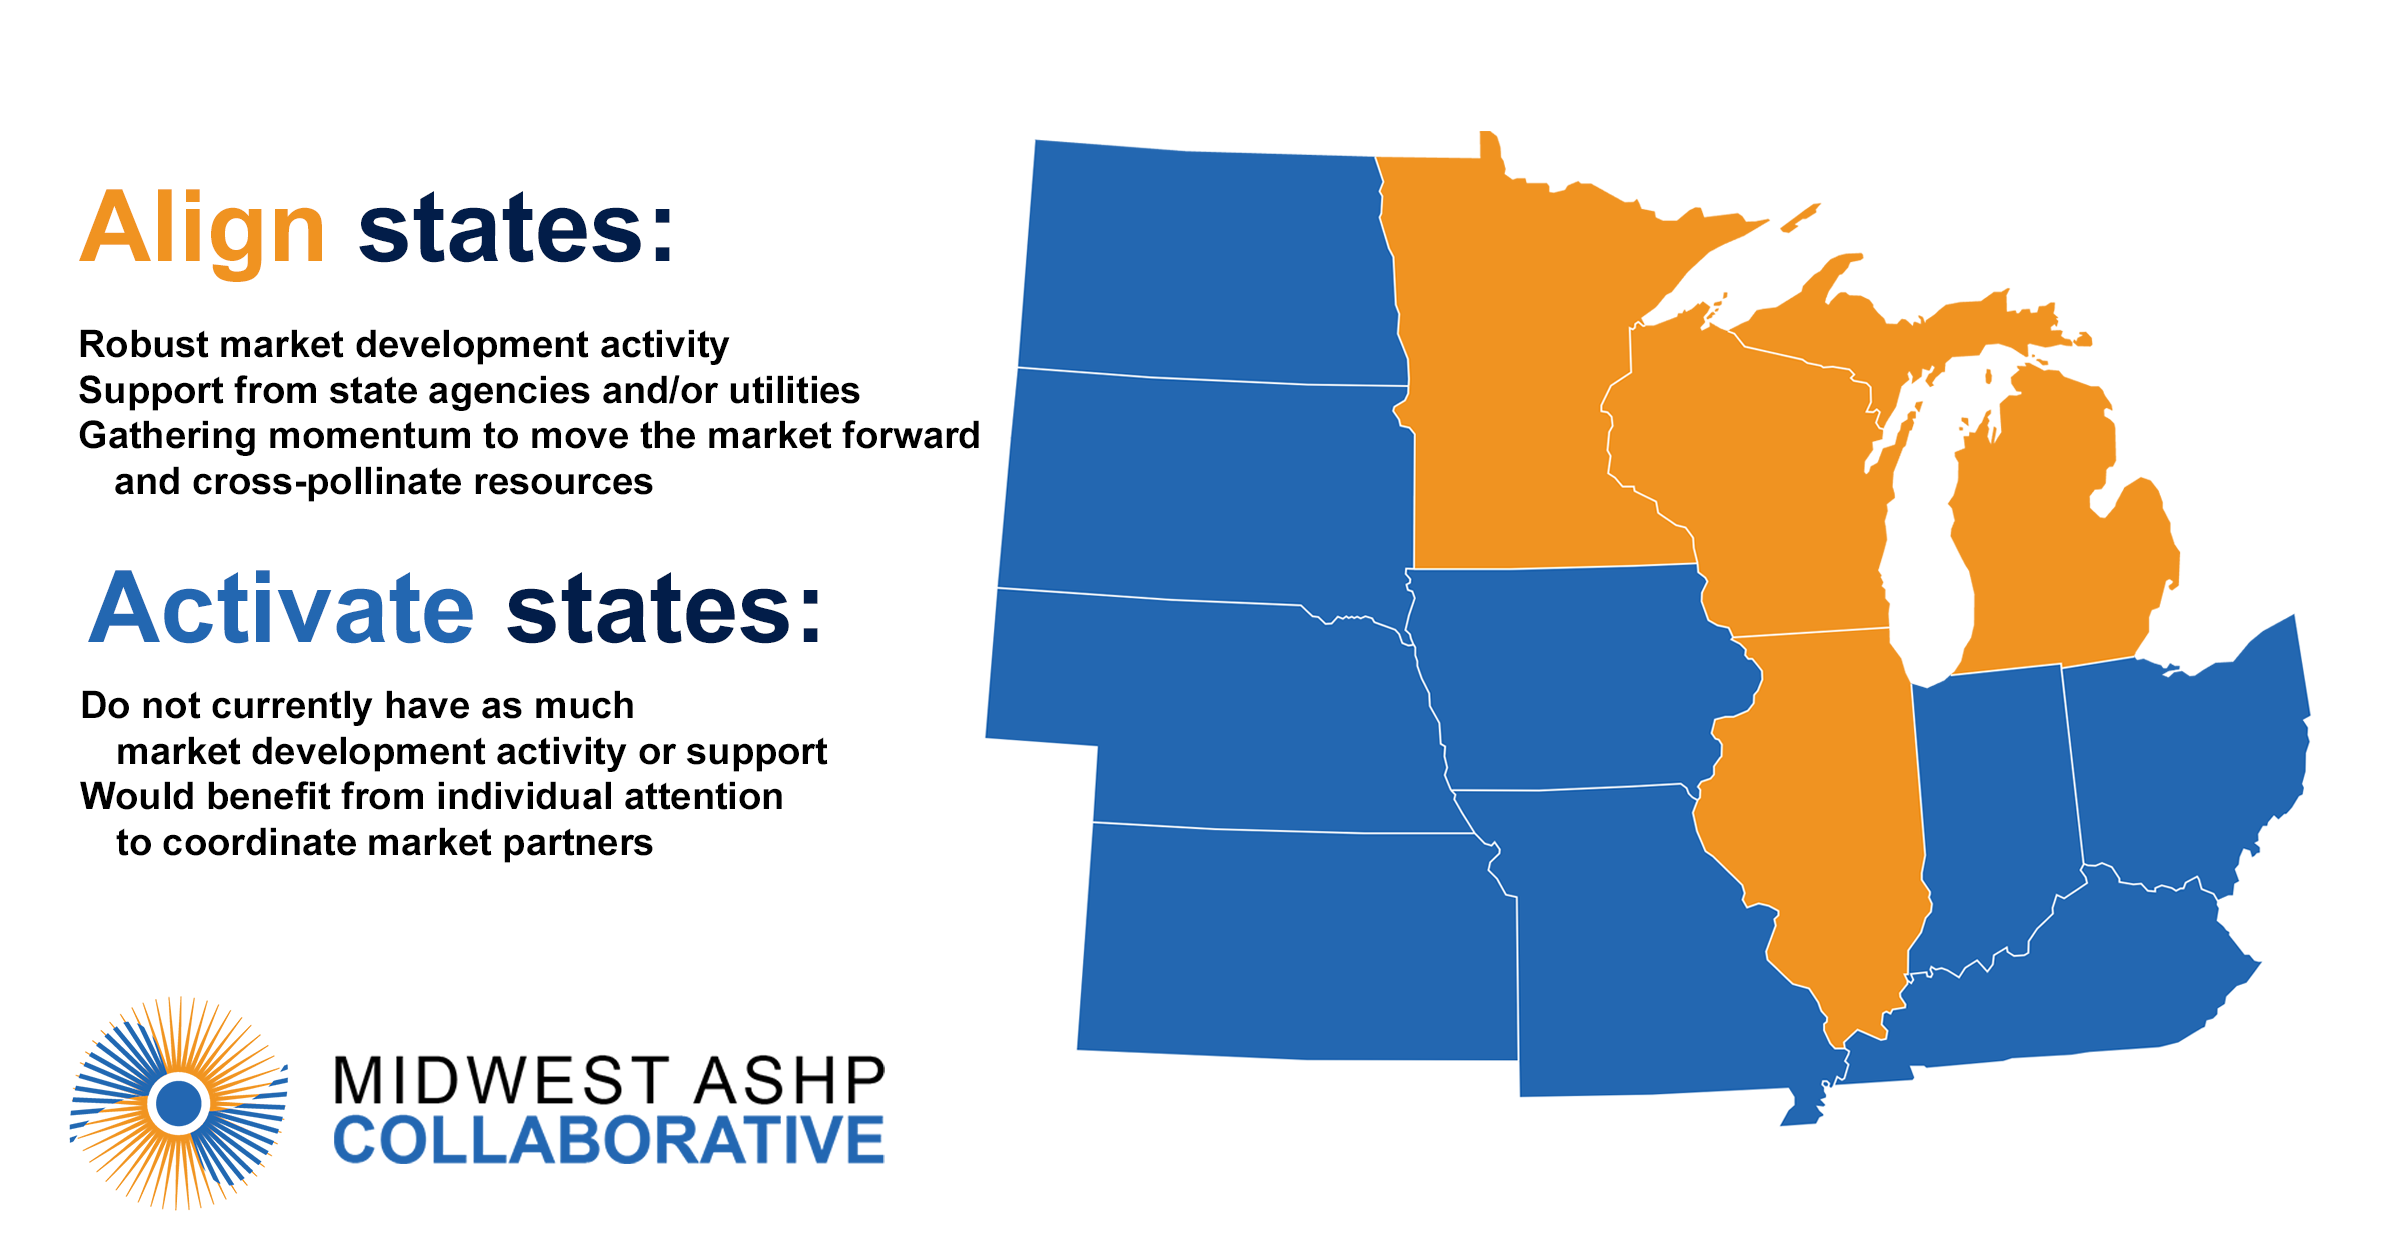 Map from the Midwest ASHP Collaborative that designates states as "Align" or "Activate" with different needs and circumstances.